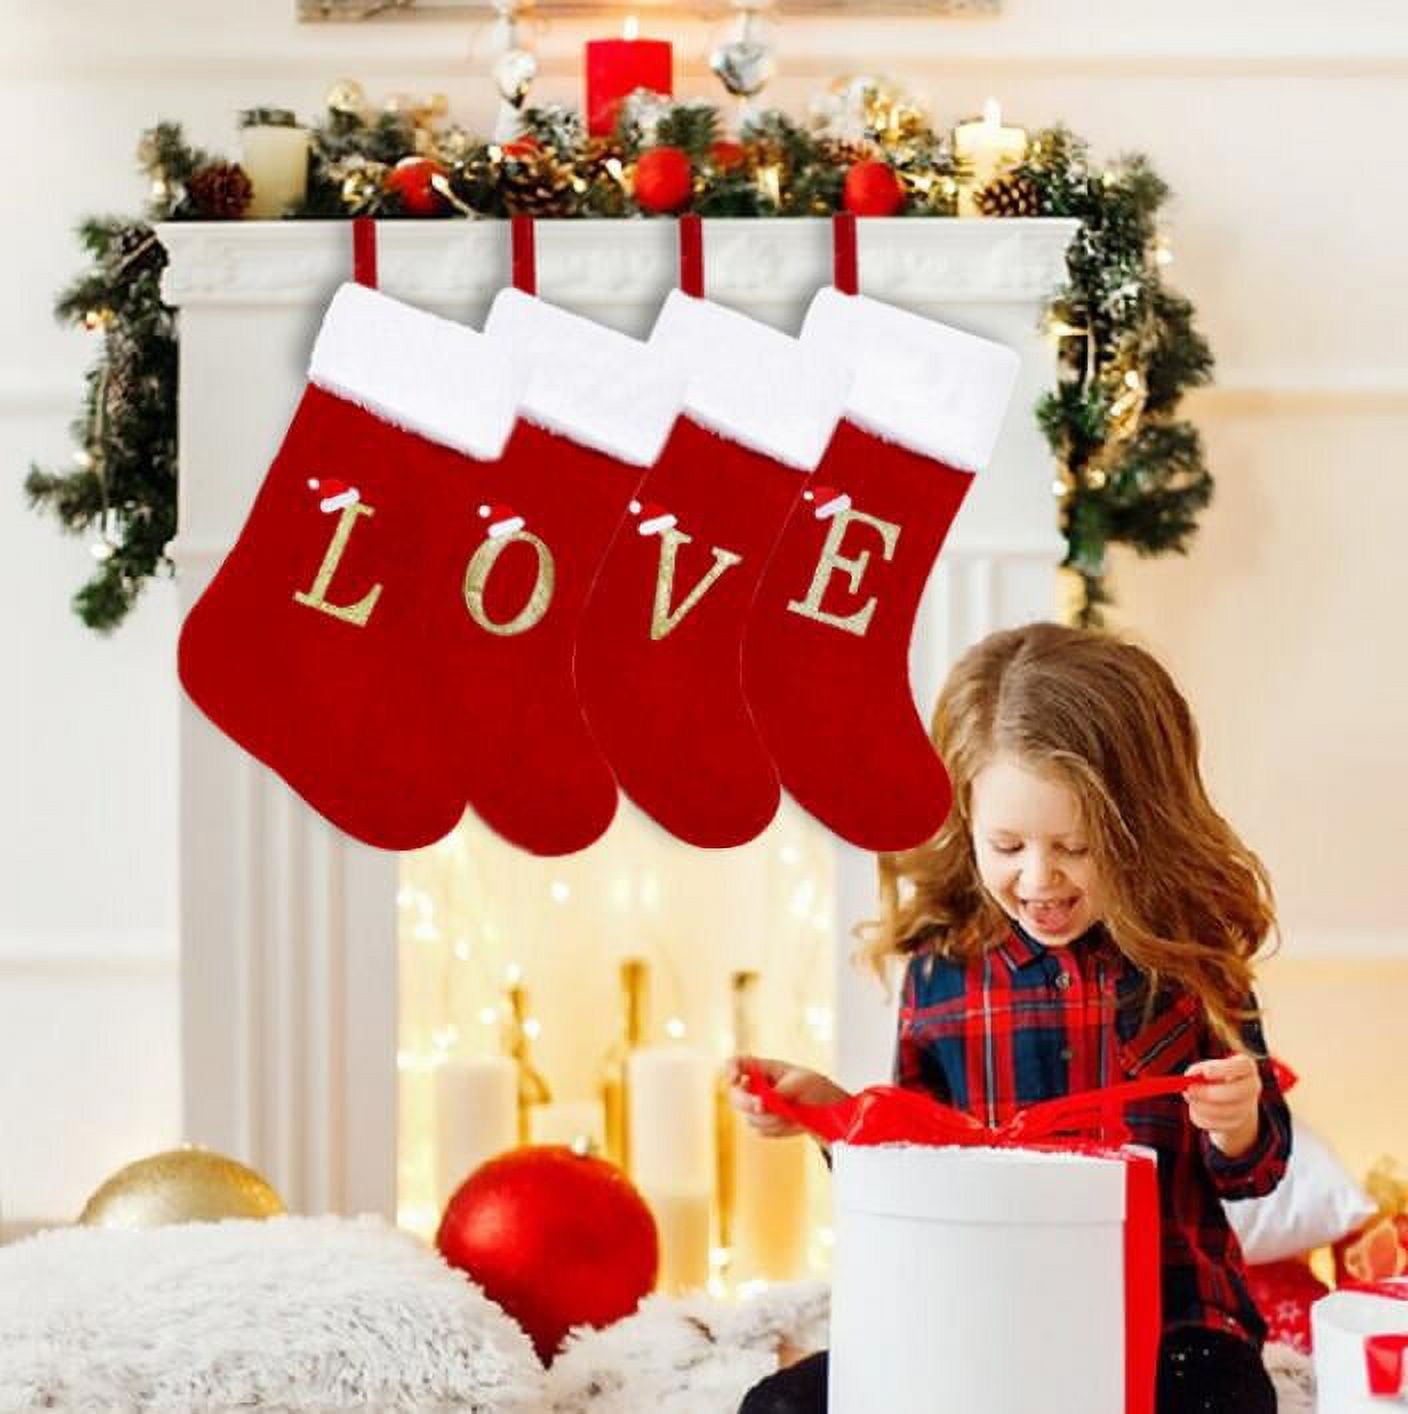  QAZIUY Christmas Stockings Christmas Decor Clearance 12pc 14  Inch Letters Christmas Stockings Super Soft Christmas Stockings Large  Stockings Red Stockings Christmas Holiday : Home & Kitchen